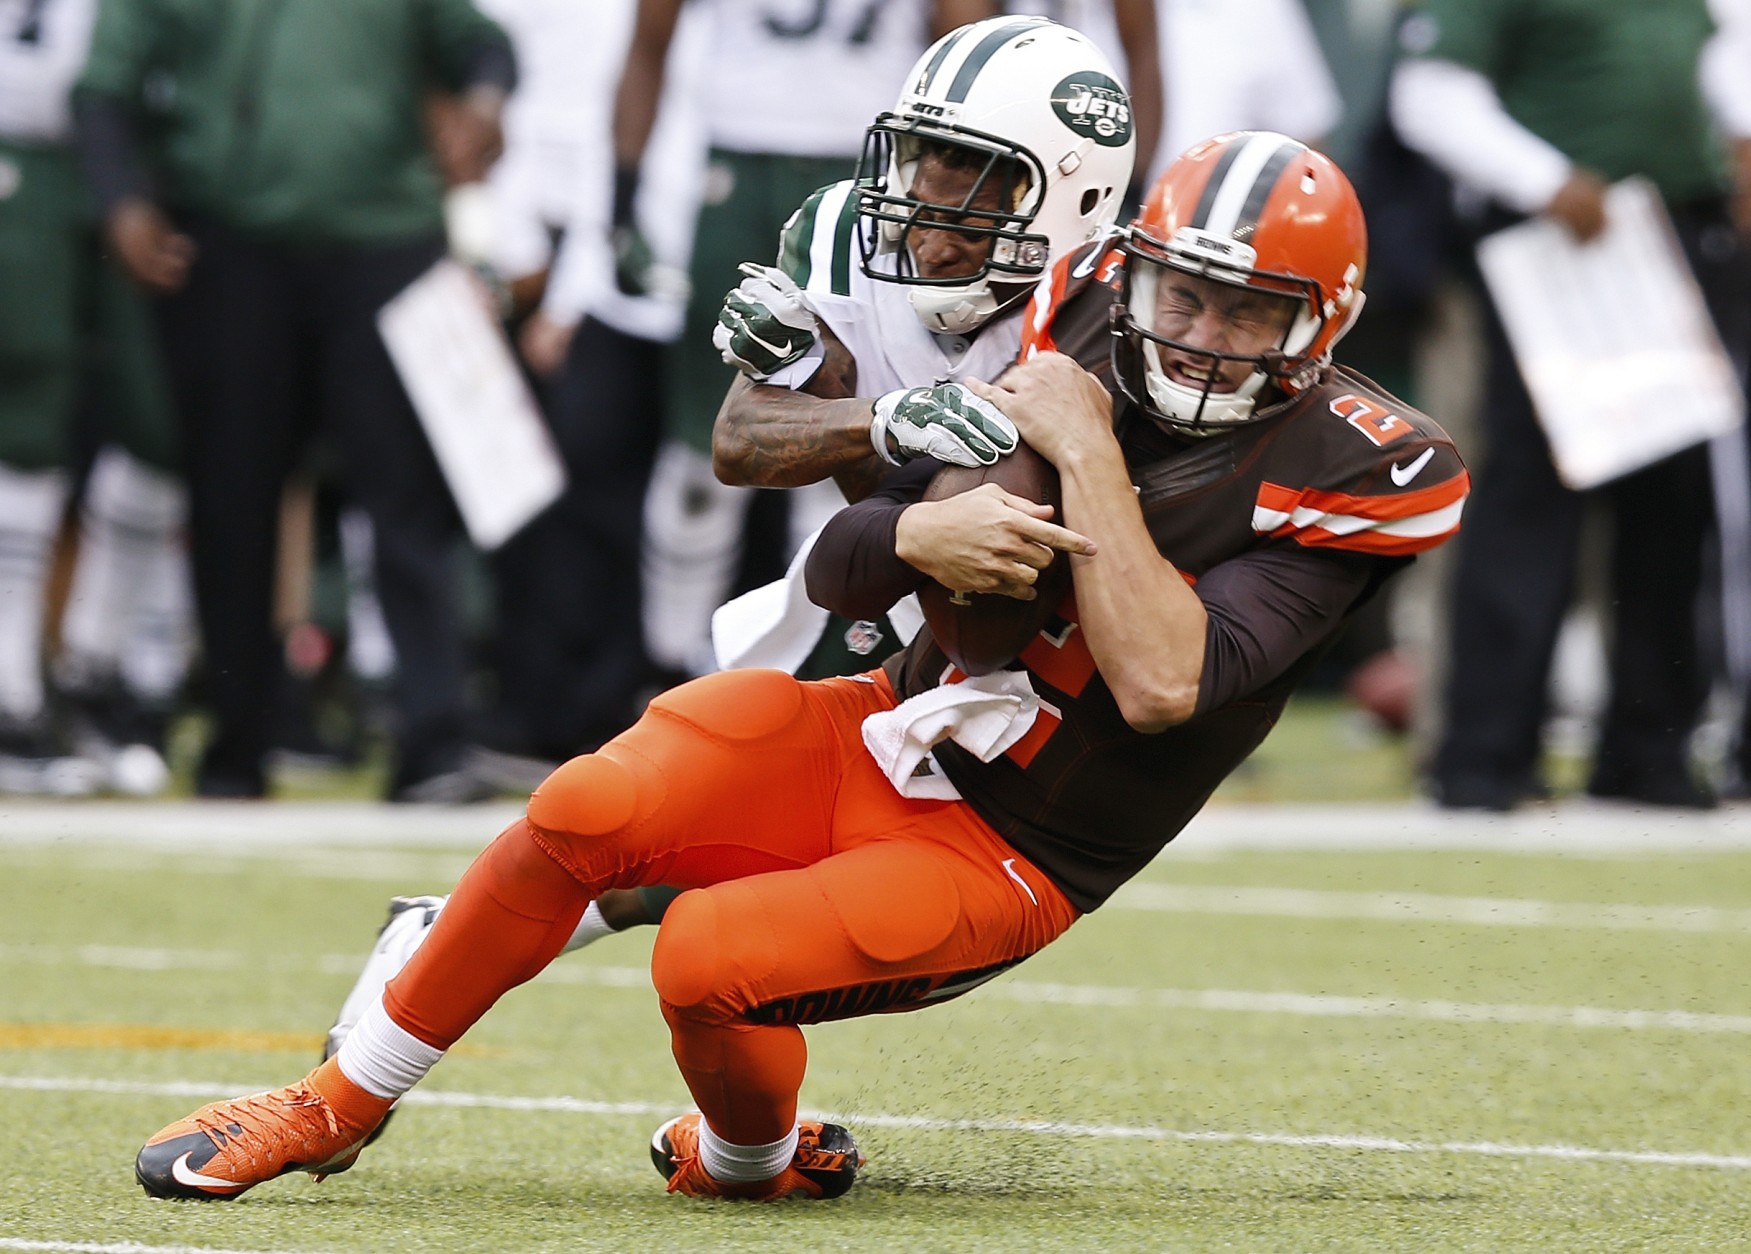 New York Jets defensive back Buster Skrine (41) tackles Cleveland Browns' Johnny Manziel (2) during the second half of an NFL football game Sunday, Sept. 13, 2015 in East Rutherford, N.J. The Jets won 31-10. (AP Photo/Kathy Willens)